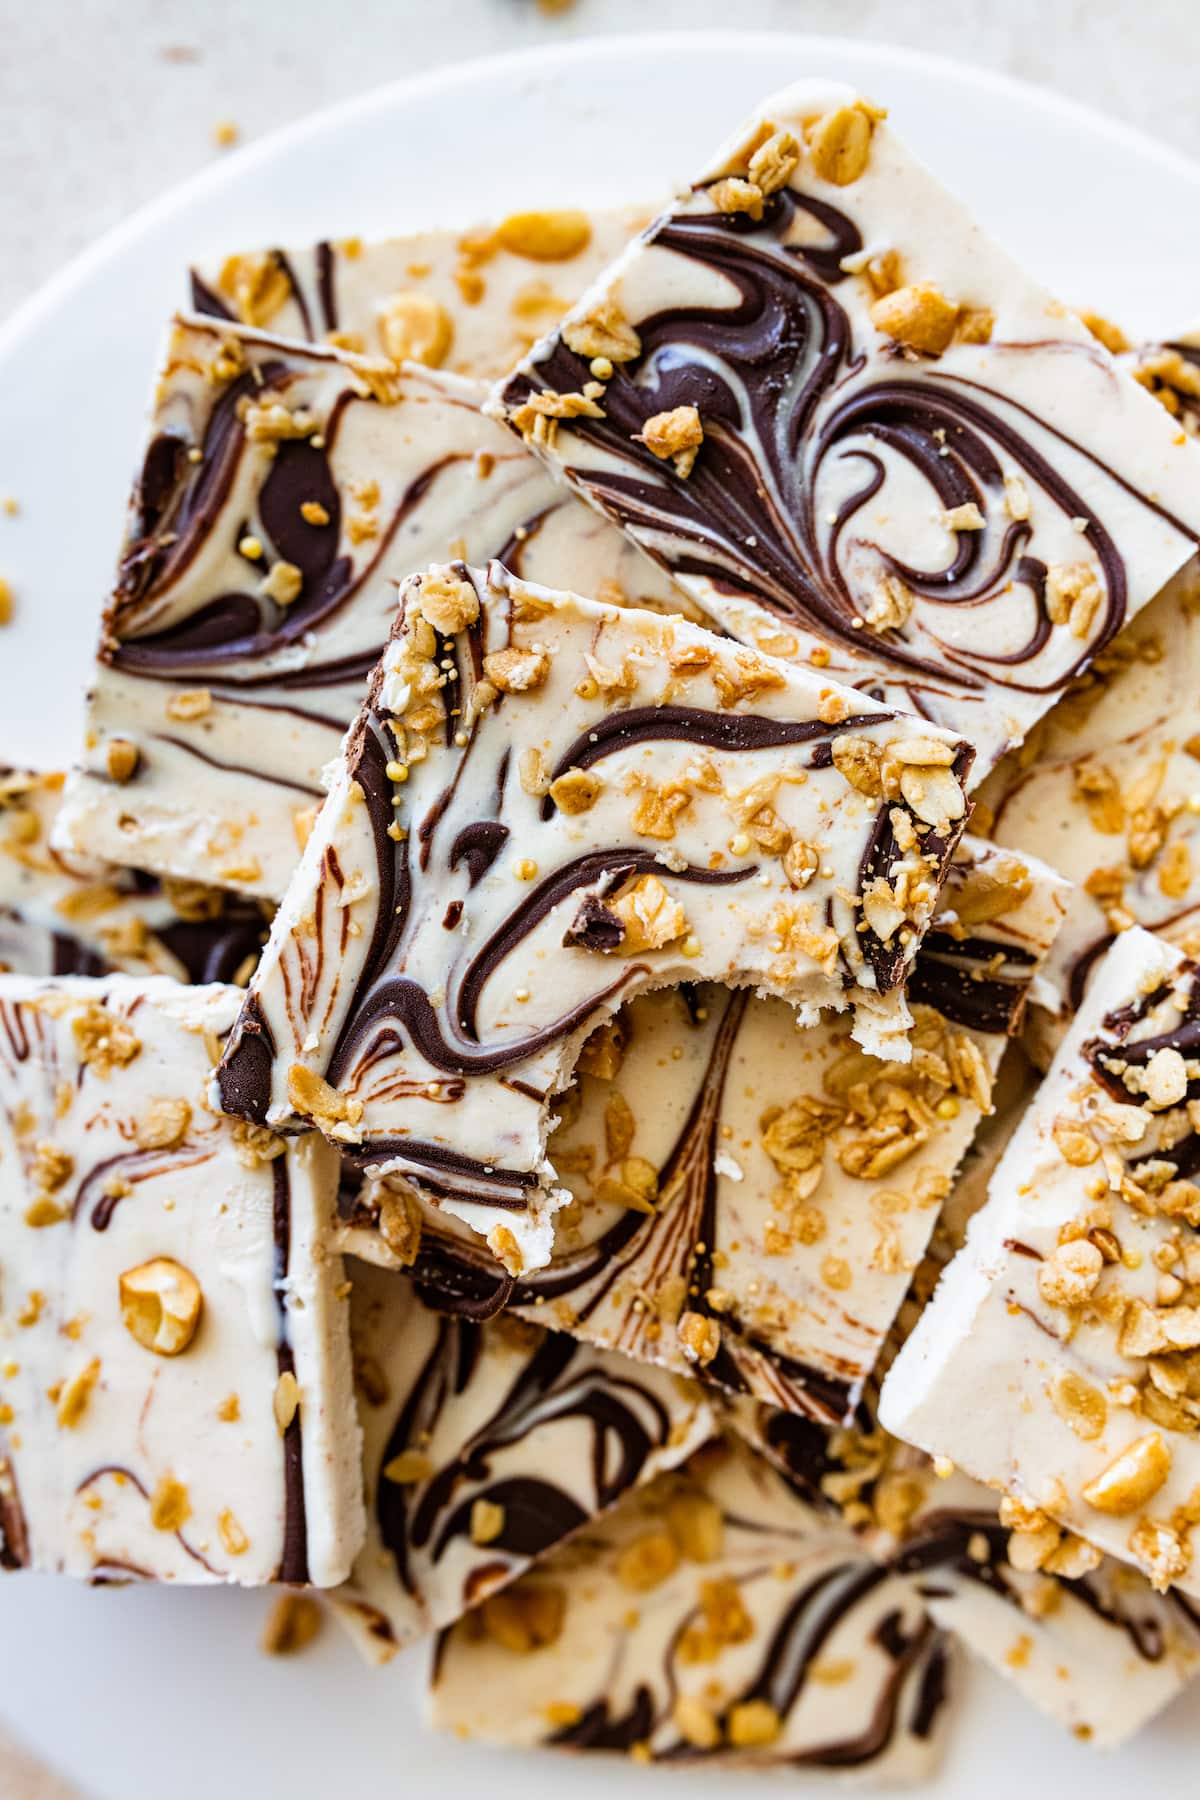 Frozen cottage cheese bark with dark chocolate and granola cut into squares and served on a white plate. The top piece has a bite taken out of it.